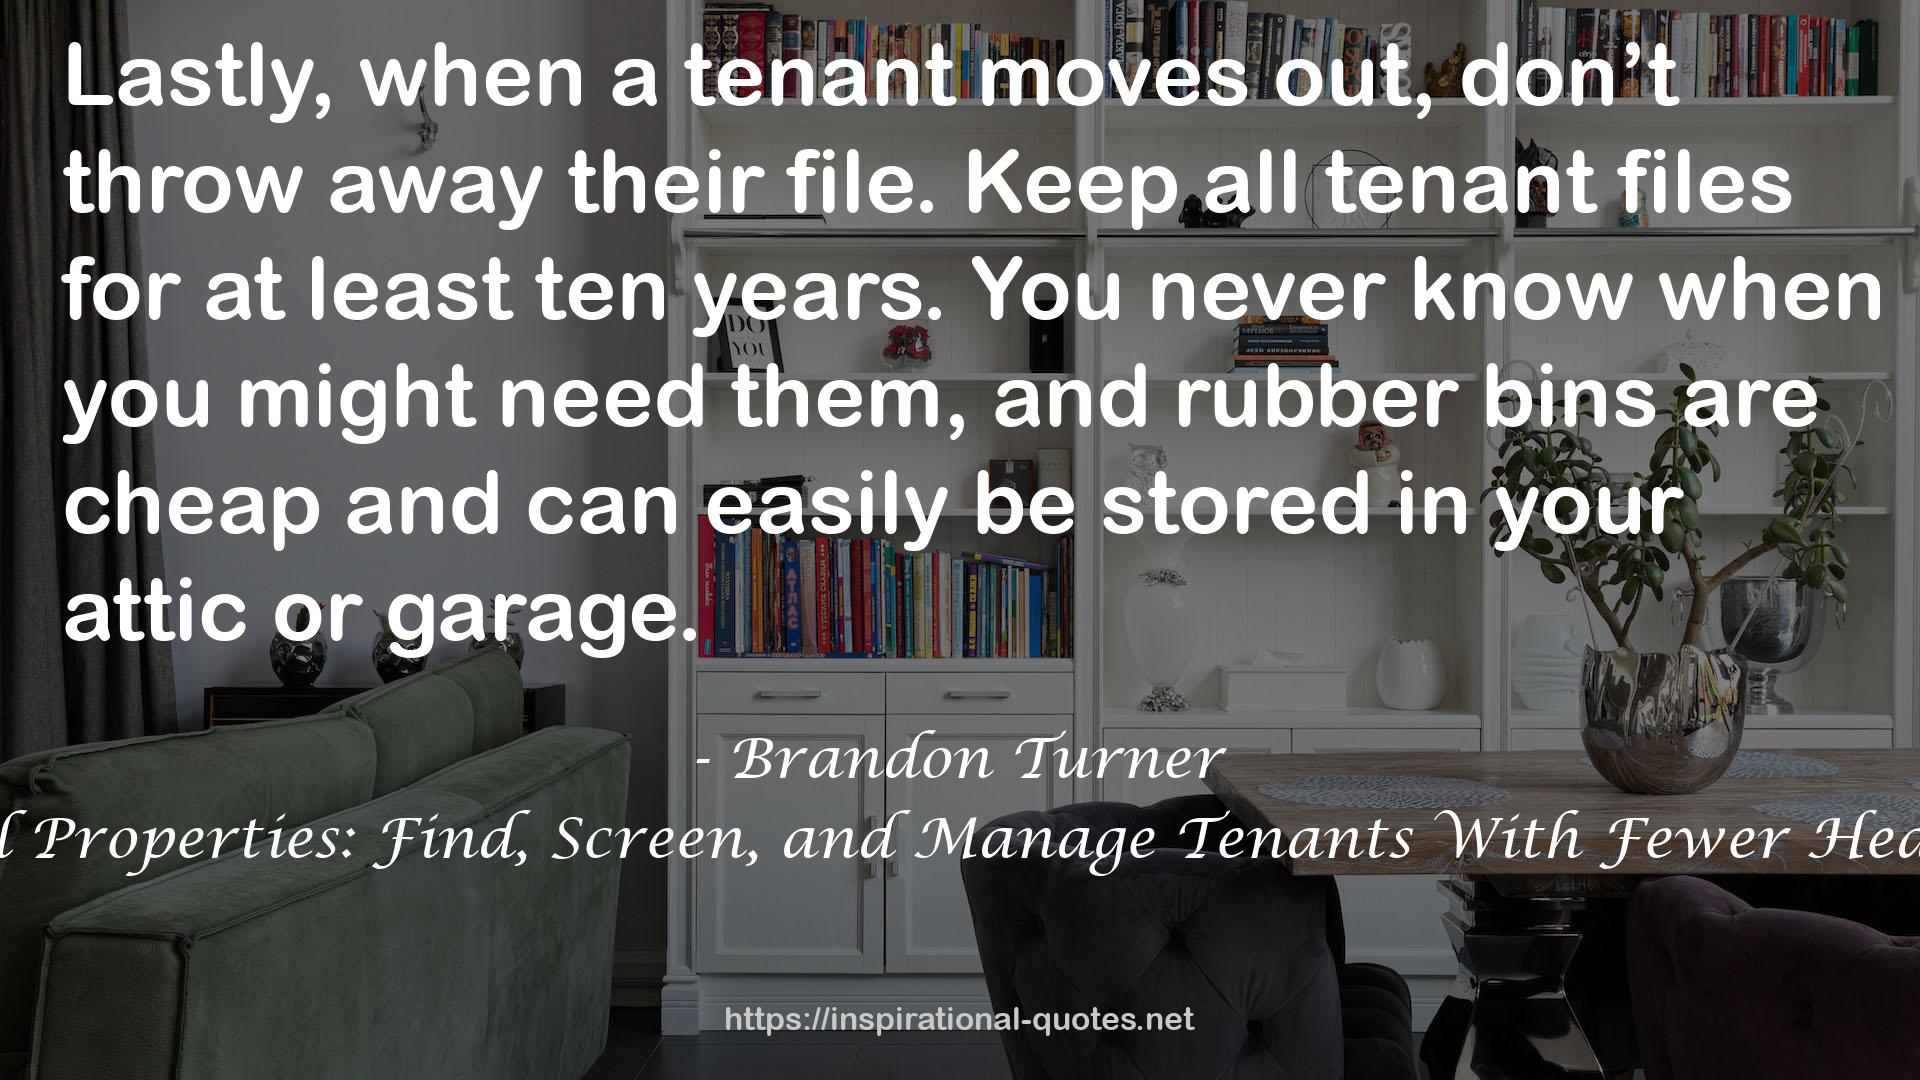 The Book on Managing Rental Properties: Find, Screen, and Manage Tenants With Fewer Headaches and Maximum Profits QUOTES